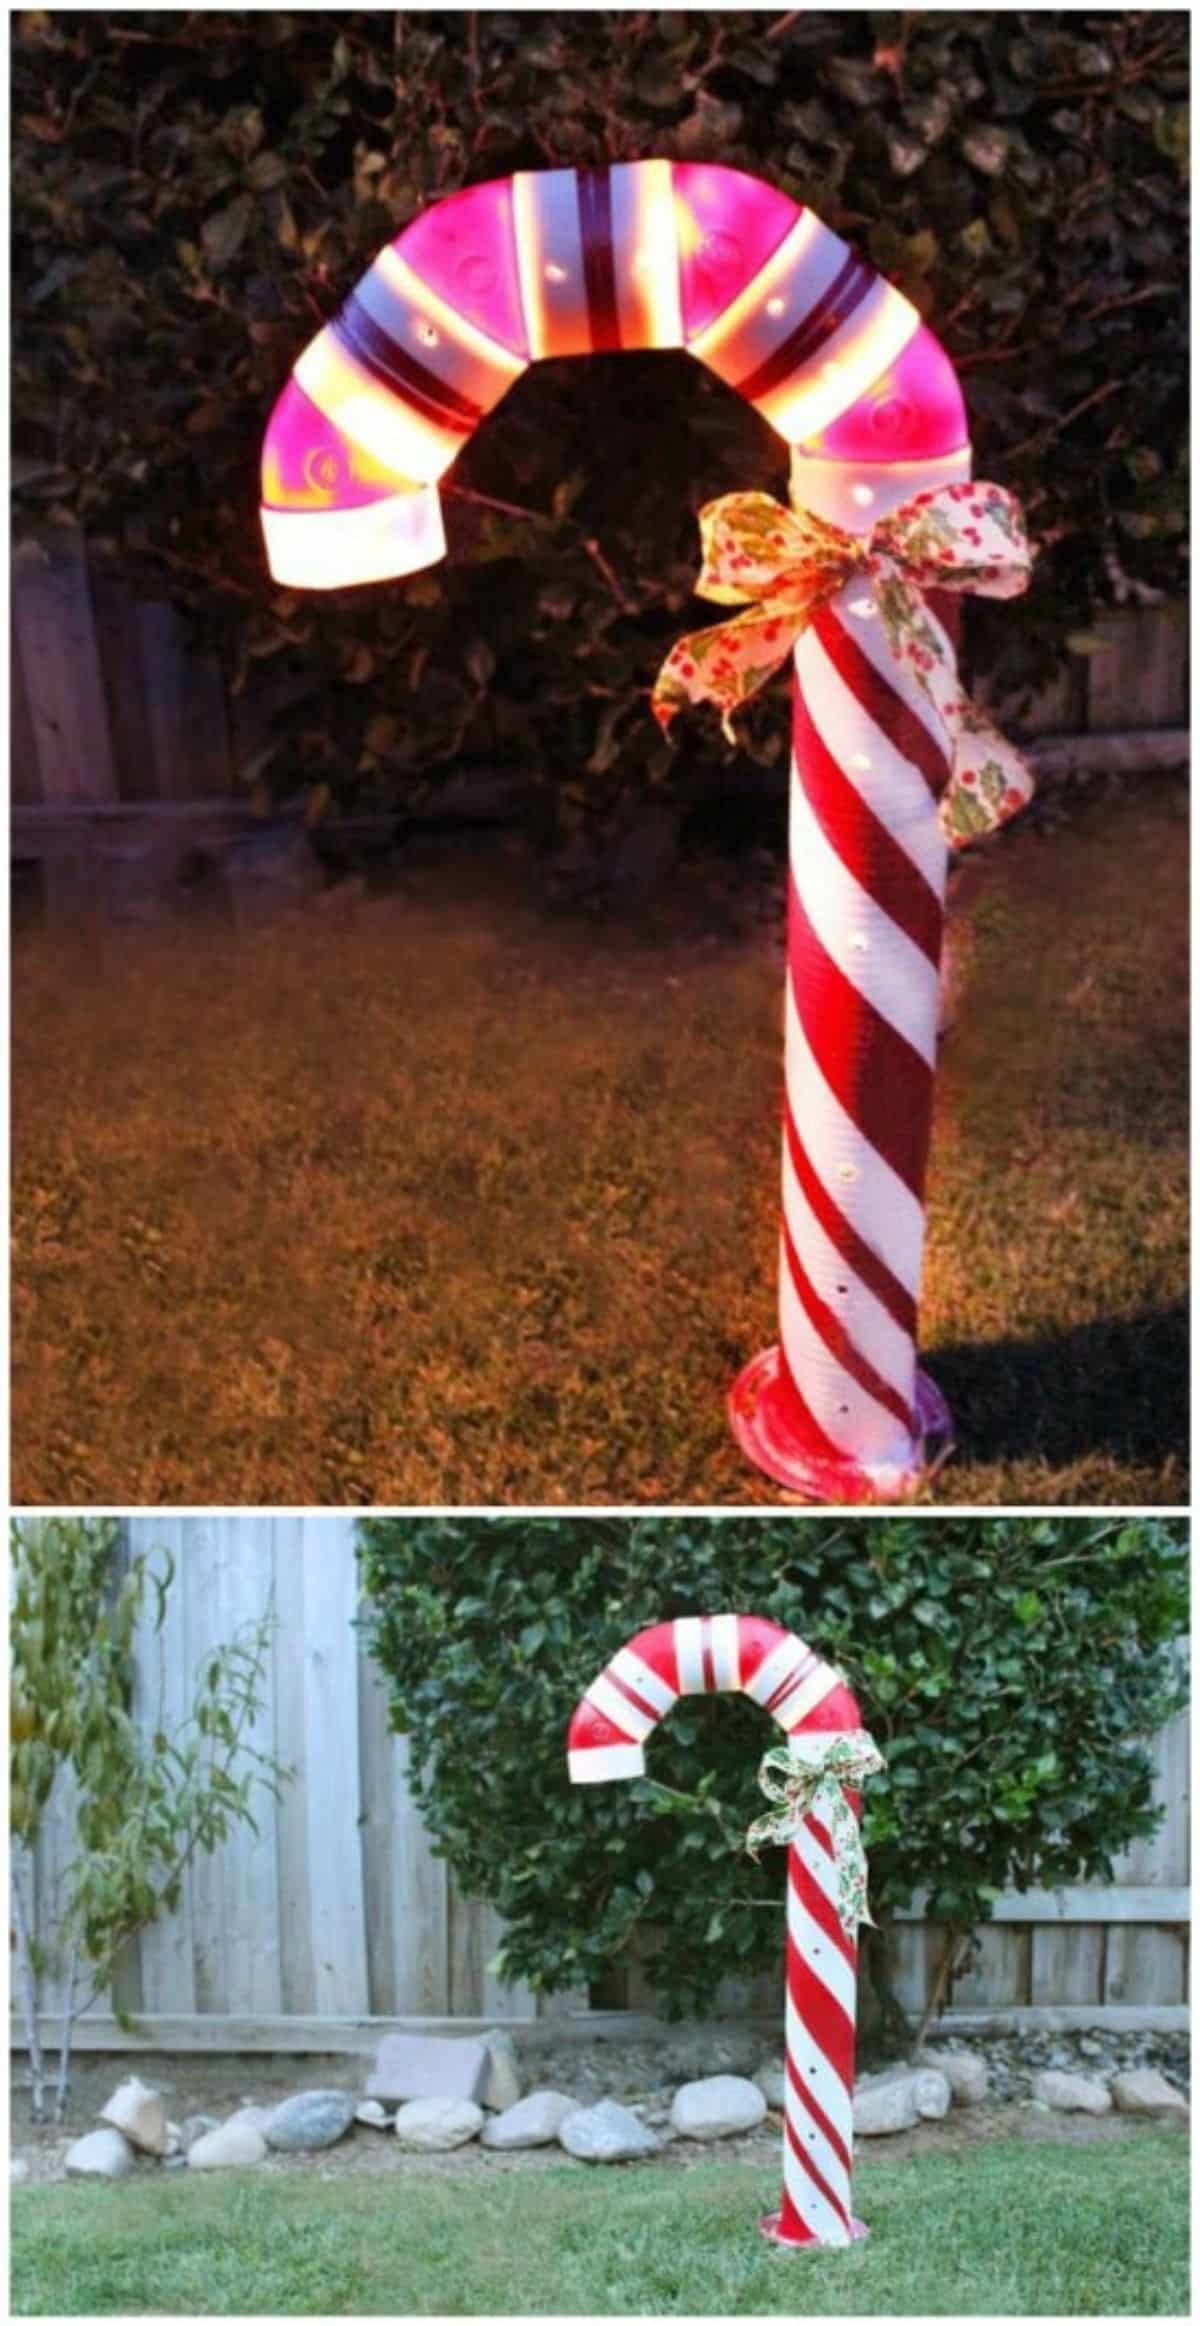 DIY Lighted Candy Canes